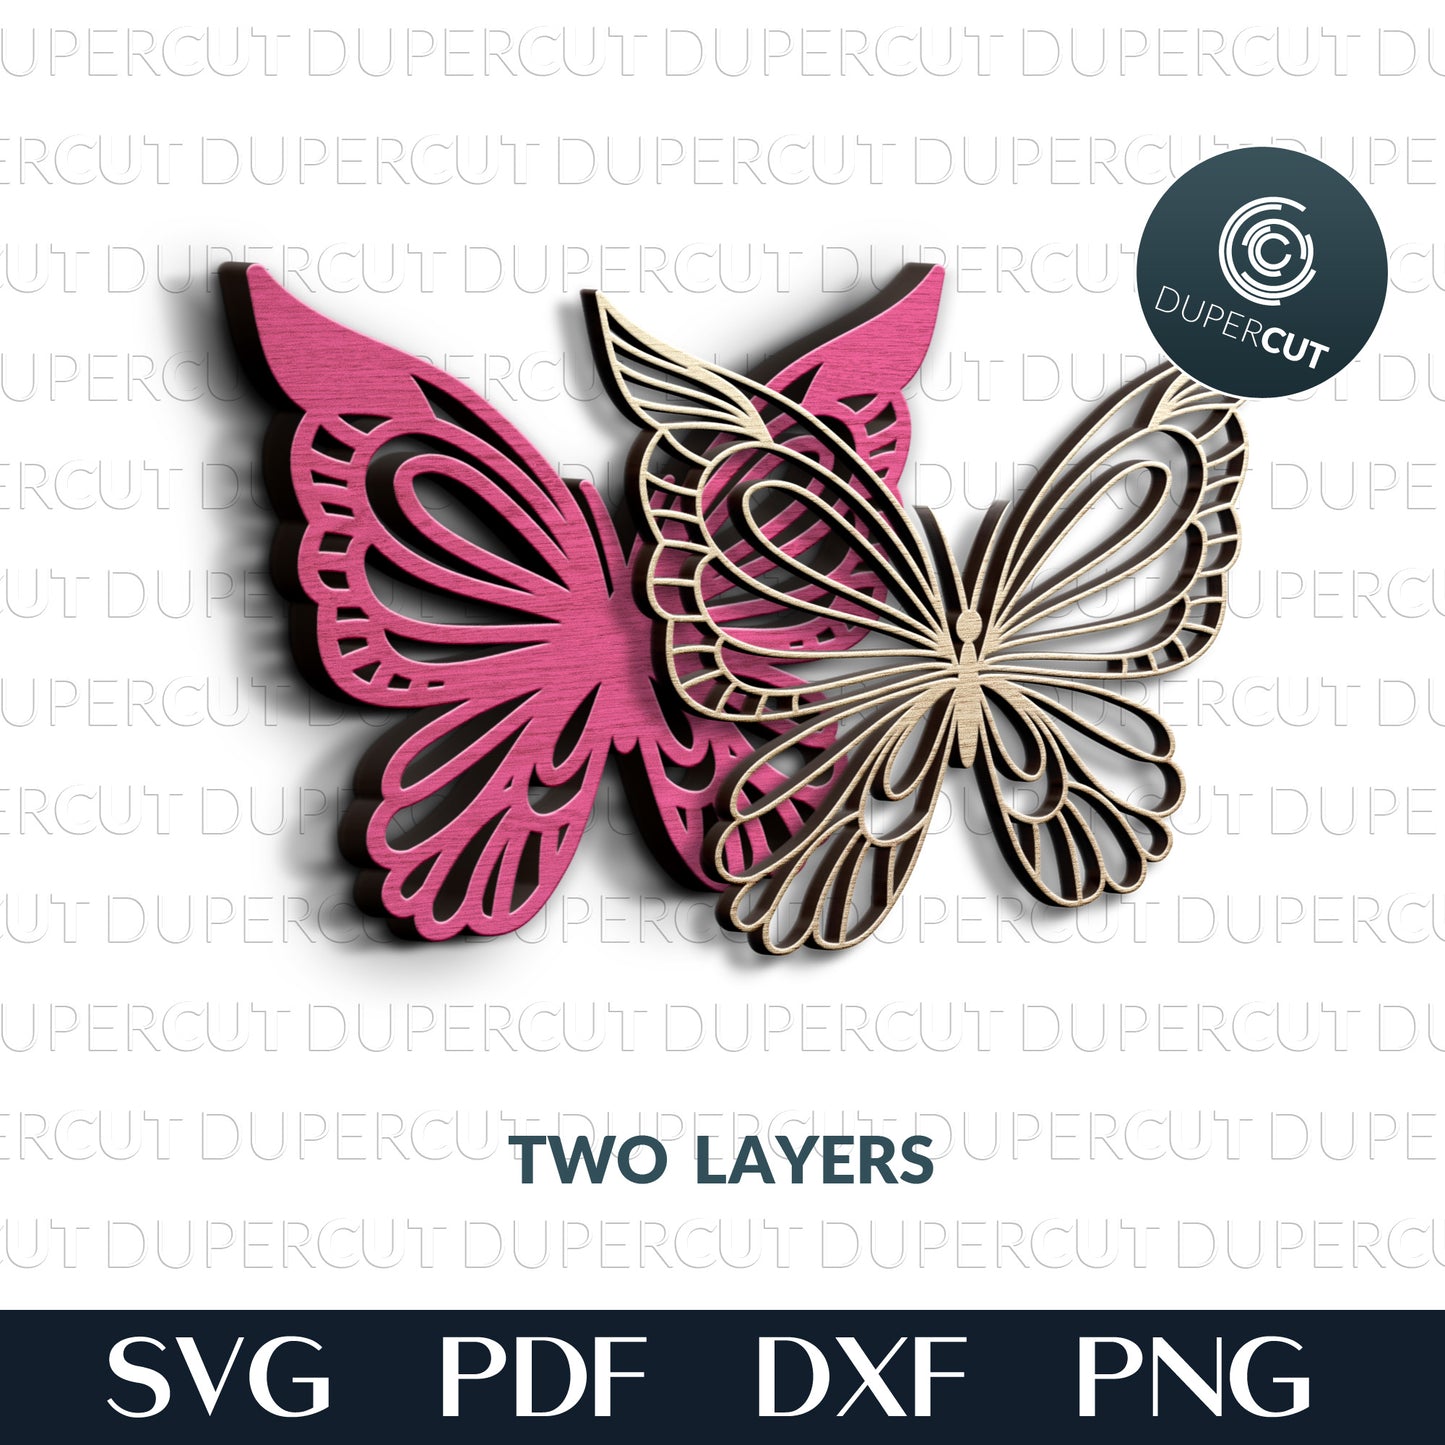 Cute Butterfly - diy girls room decoration - layered cutting template - SVG PDF DXF vector files for laser cutting with Glowforge, Cricut, Silhouette Cameo, CNC plasma machines by DuperCut